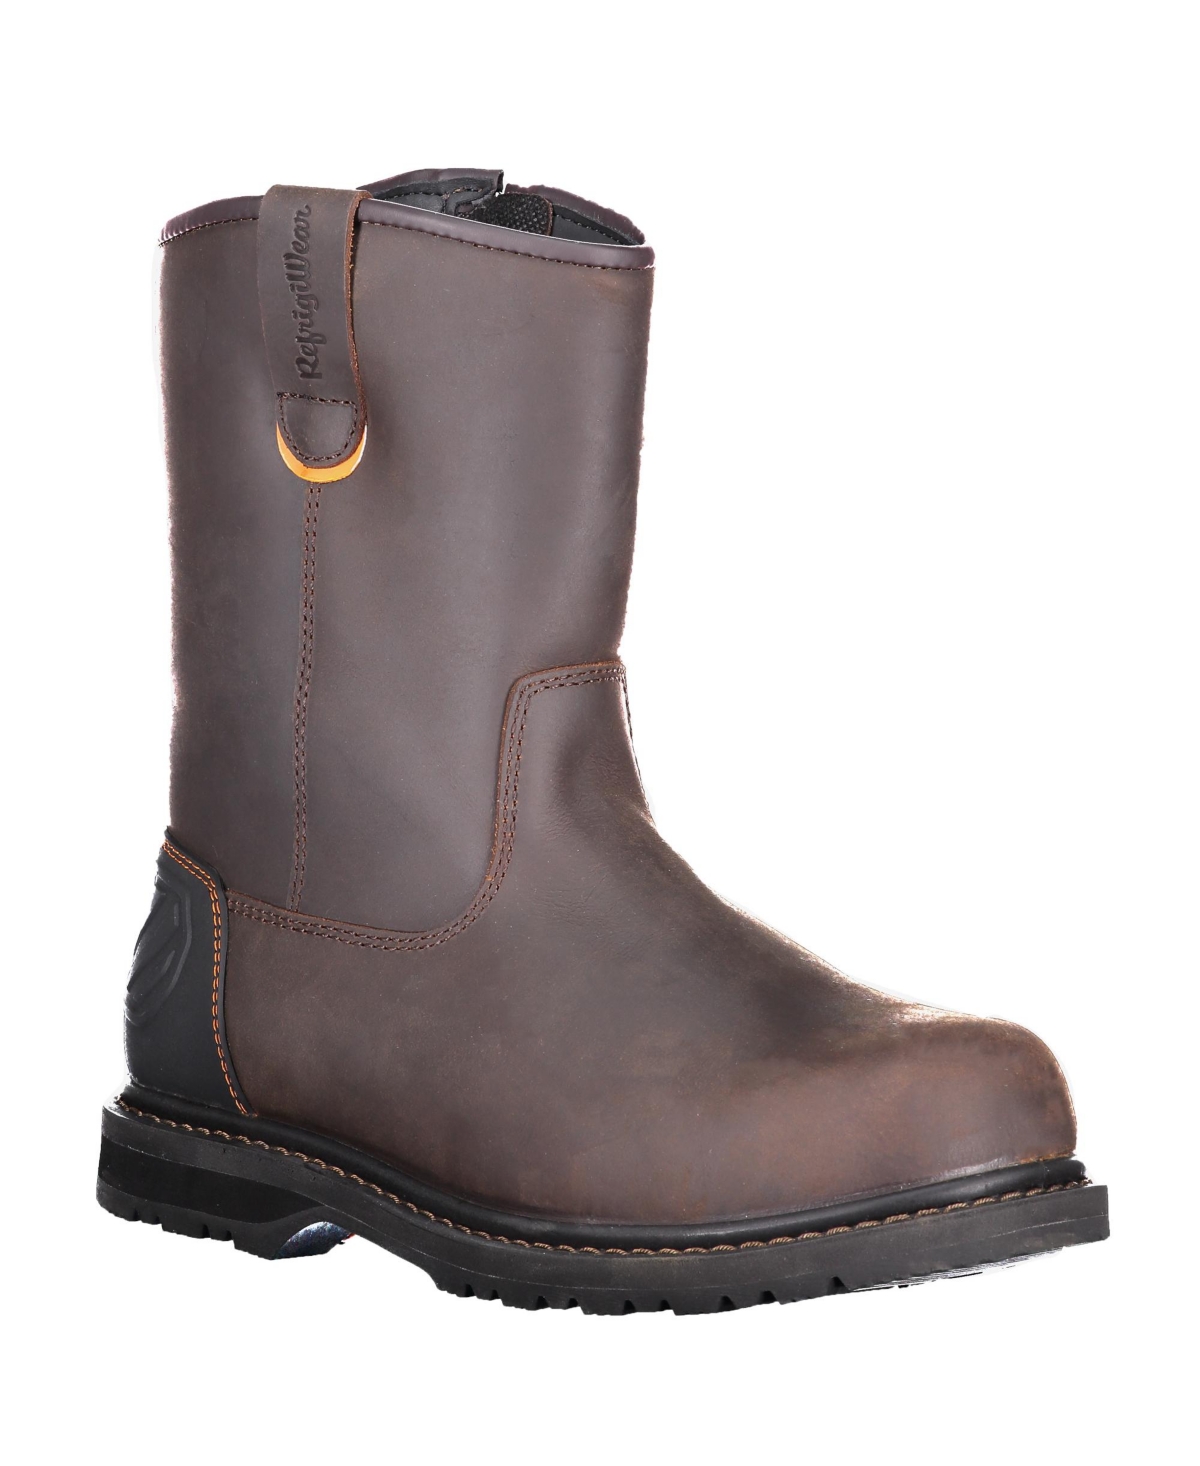 Men's Barrier Lightweight Insulated 9-Inch Brown Leather Work Boots - Brown